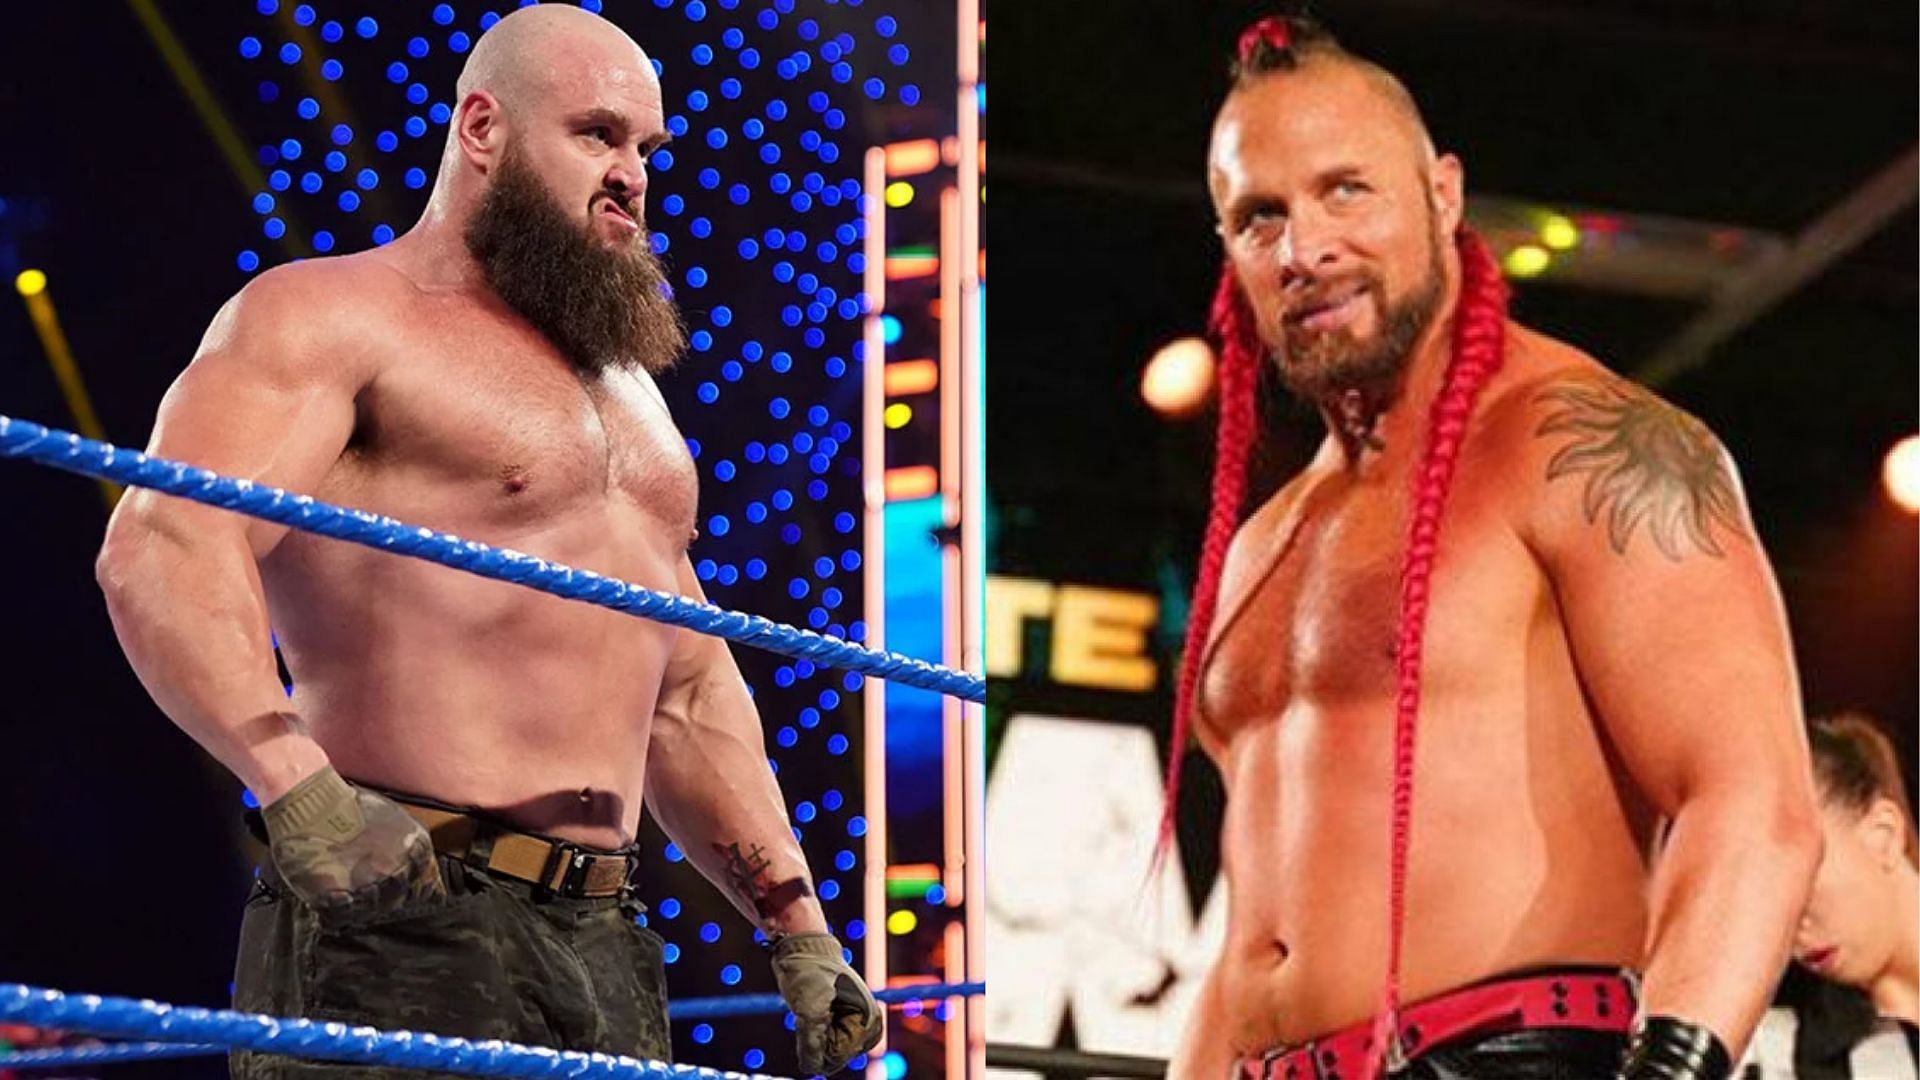 AEW&#039;s Lance Archer (right) shares similar qualities to Braun Strowman (left)